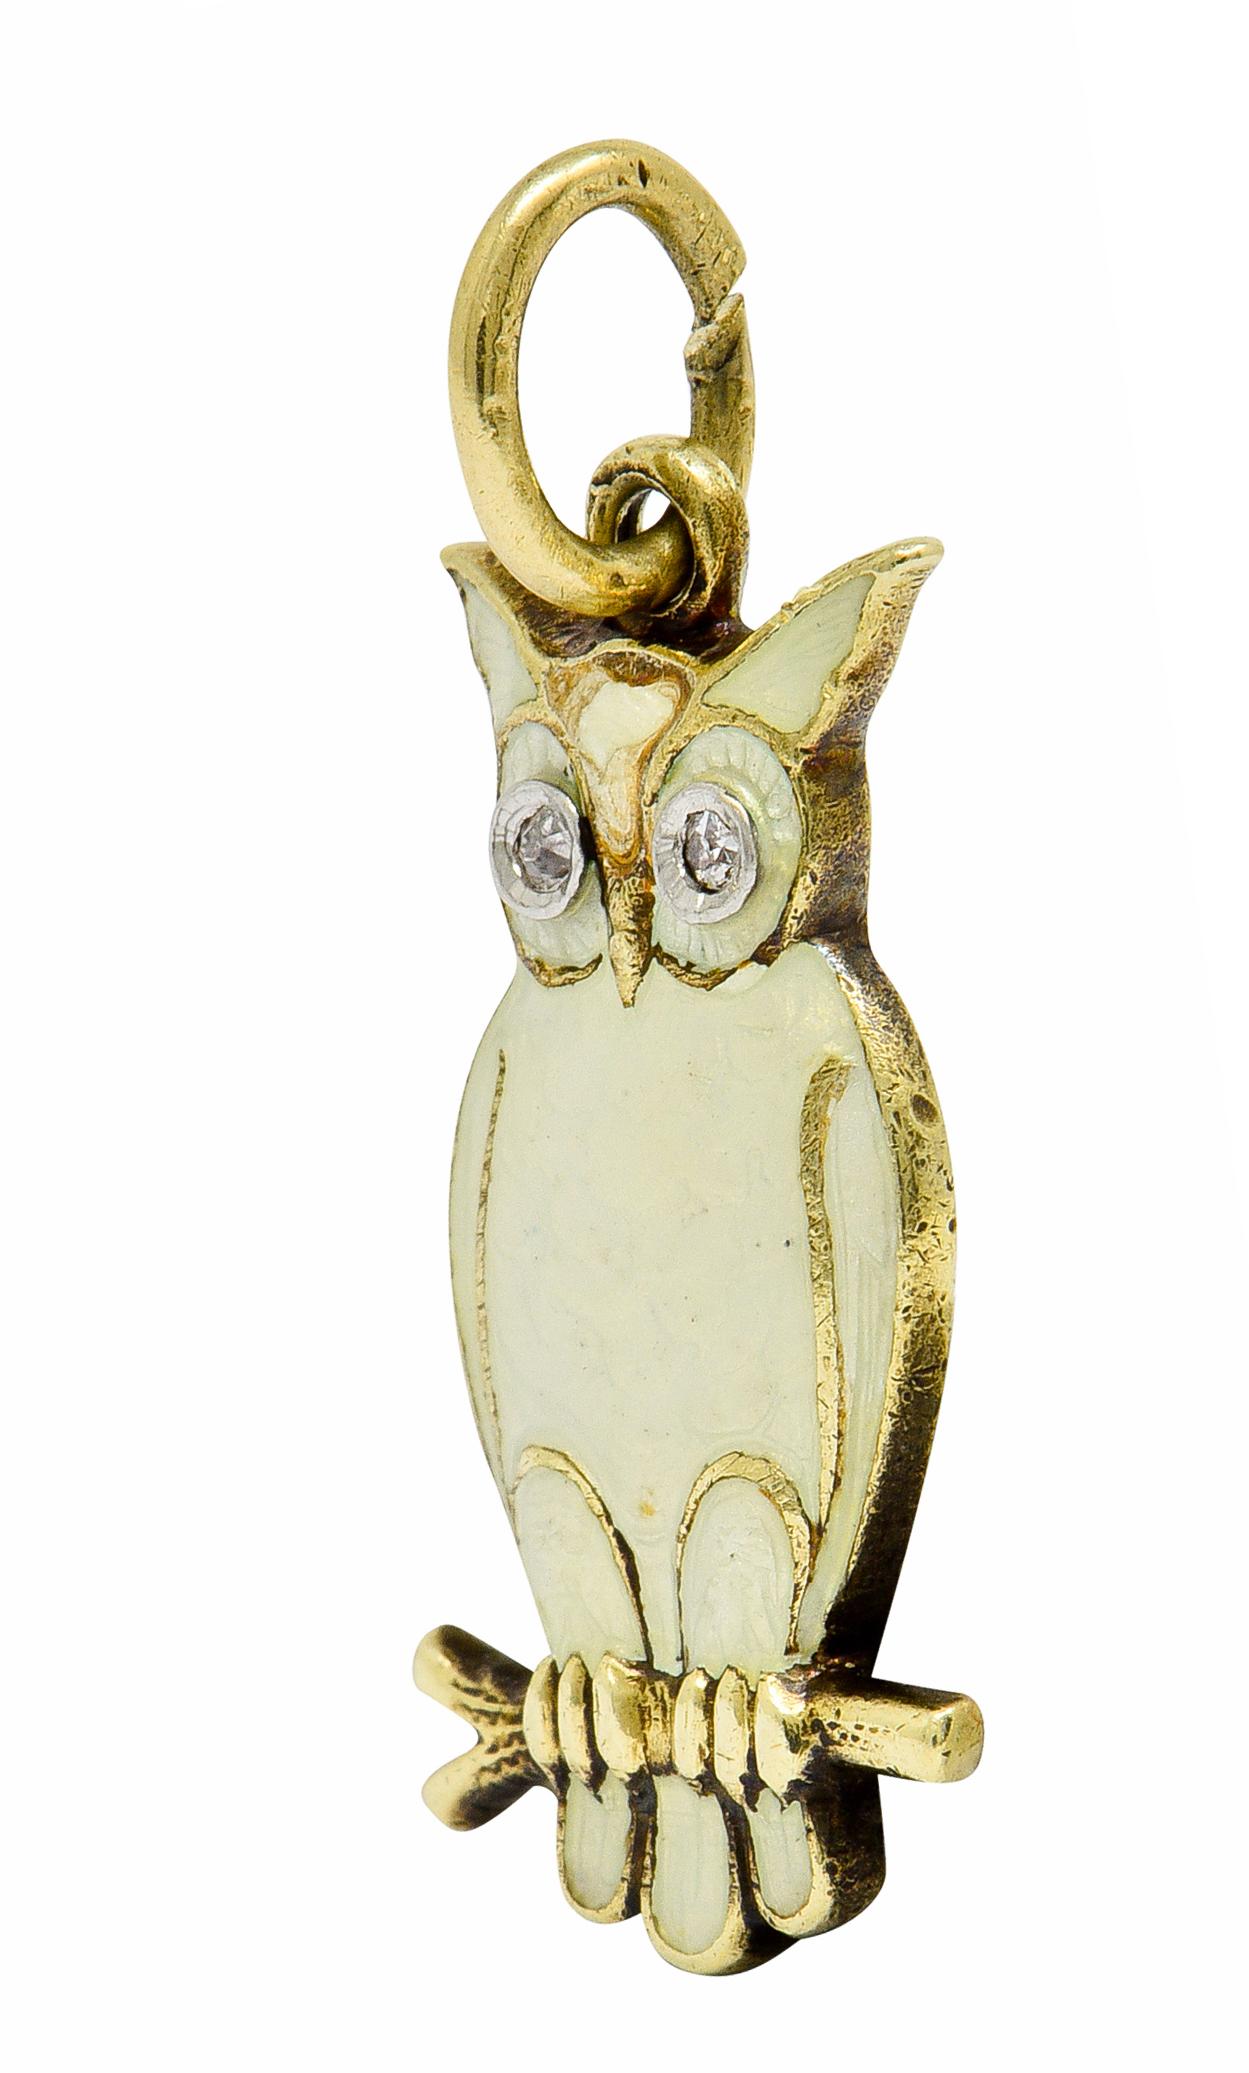 Designed as an owl perched on a branch with diamond eye accents

Body is glossed on both sides with a pearlescent white enamel exhibiting no loss

Back of owl features in gold lettering 'La Nuit Porte Conseil' French to mean 